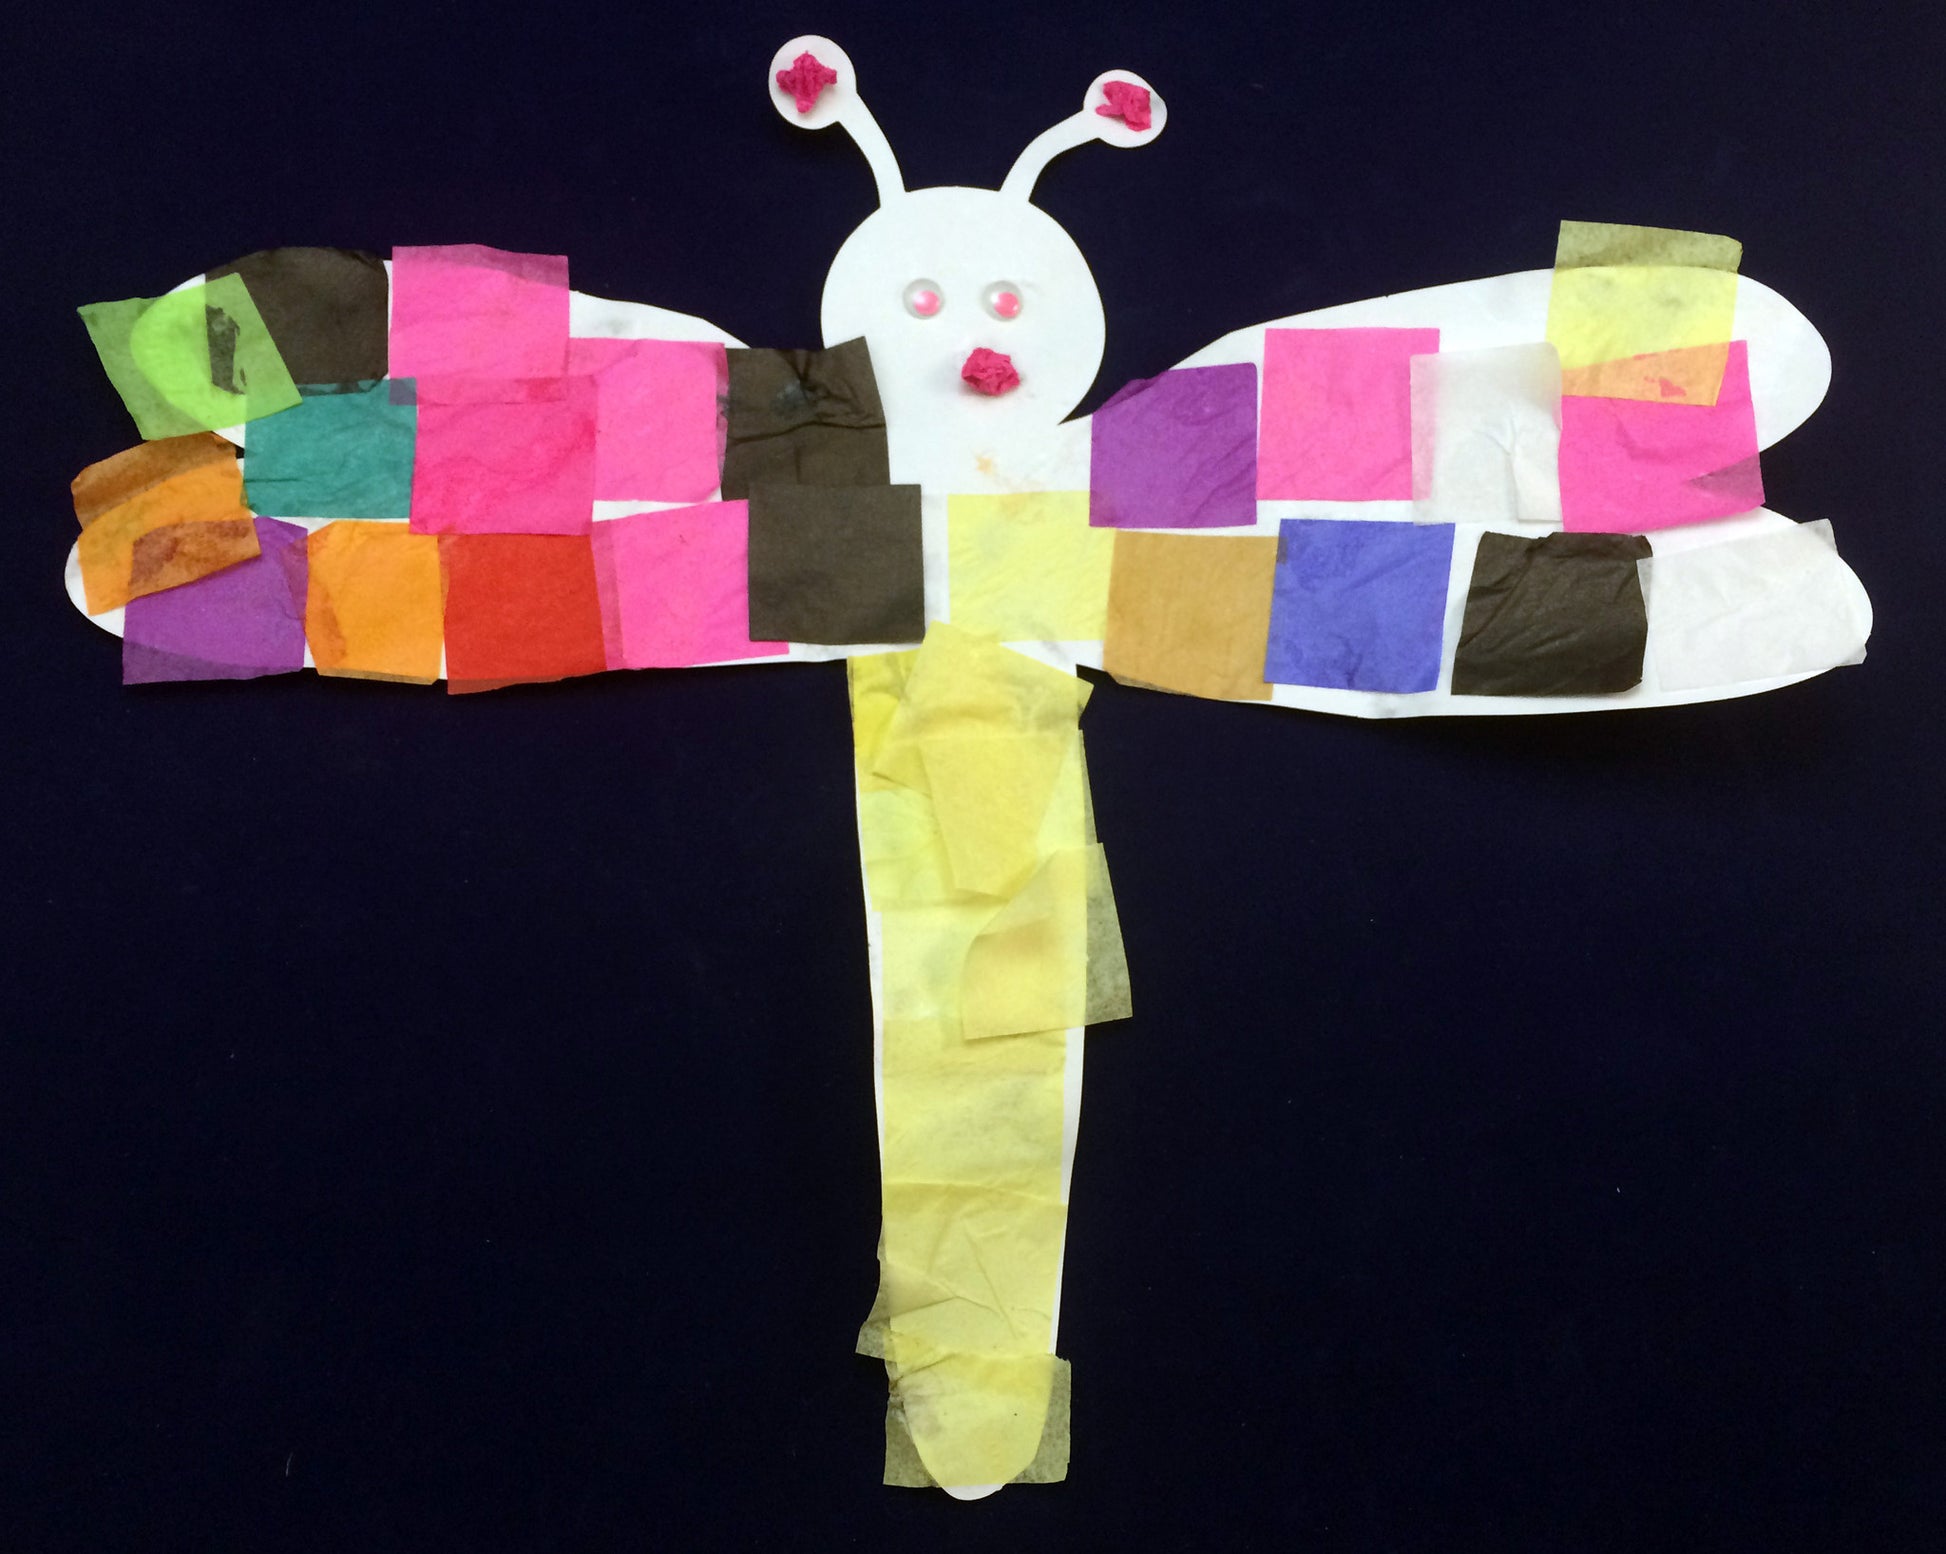 Art Activity - Collage Firefly that Glows-In-The-Dark Inspired by The Very Lonely Firefly by Eric Carle